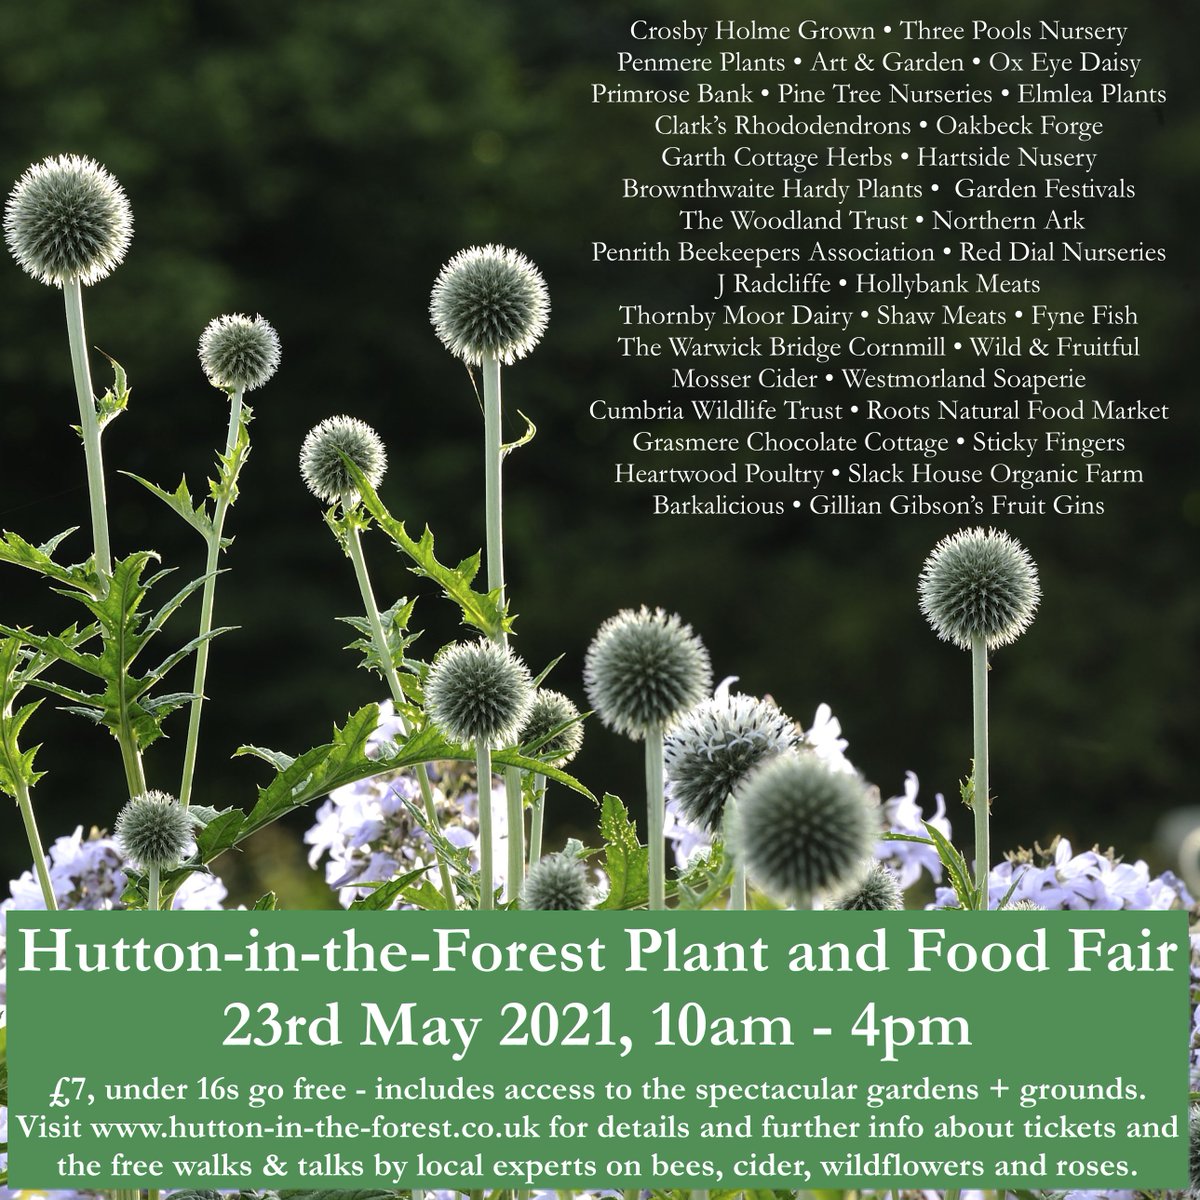 Come on Sunday to the Plant & Food Fair at Hutton-in-the-Forest! The weather is set to be PERFECT (for plants and ducks) @primrosebank @OakbeckForge @HartsideNursery @Shawmeatsltd @fynefishdeli @cumbriawildlife @WoodlandTrust #theperfectplacetobe #cumbria #Lakedistrict #visiteden